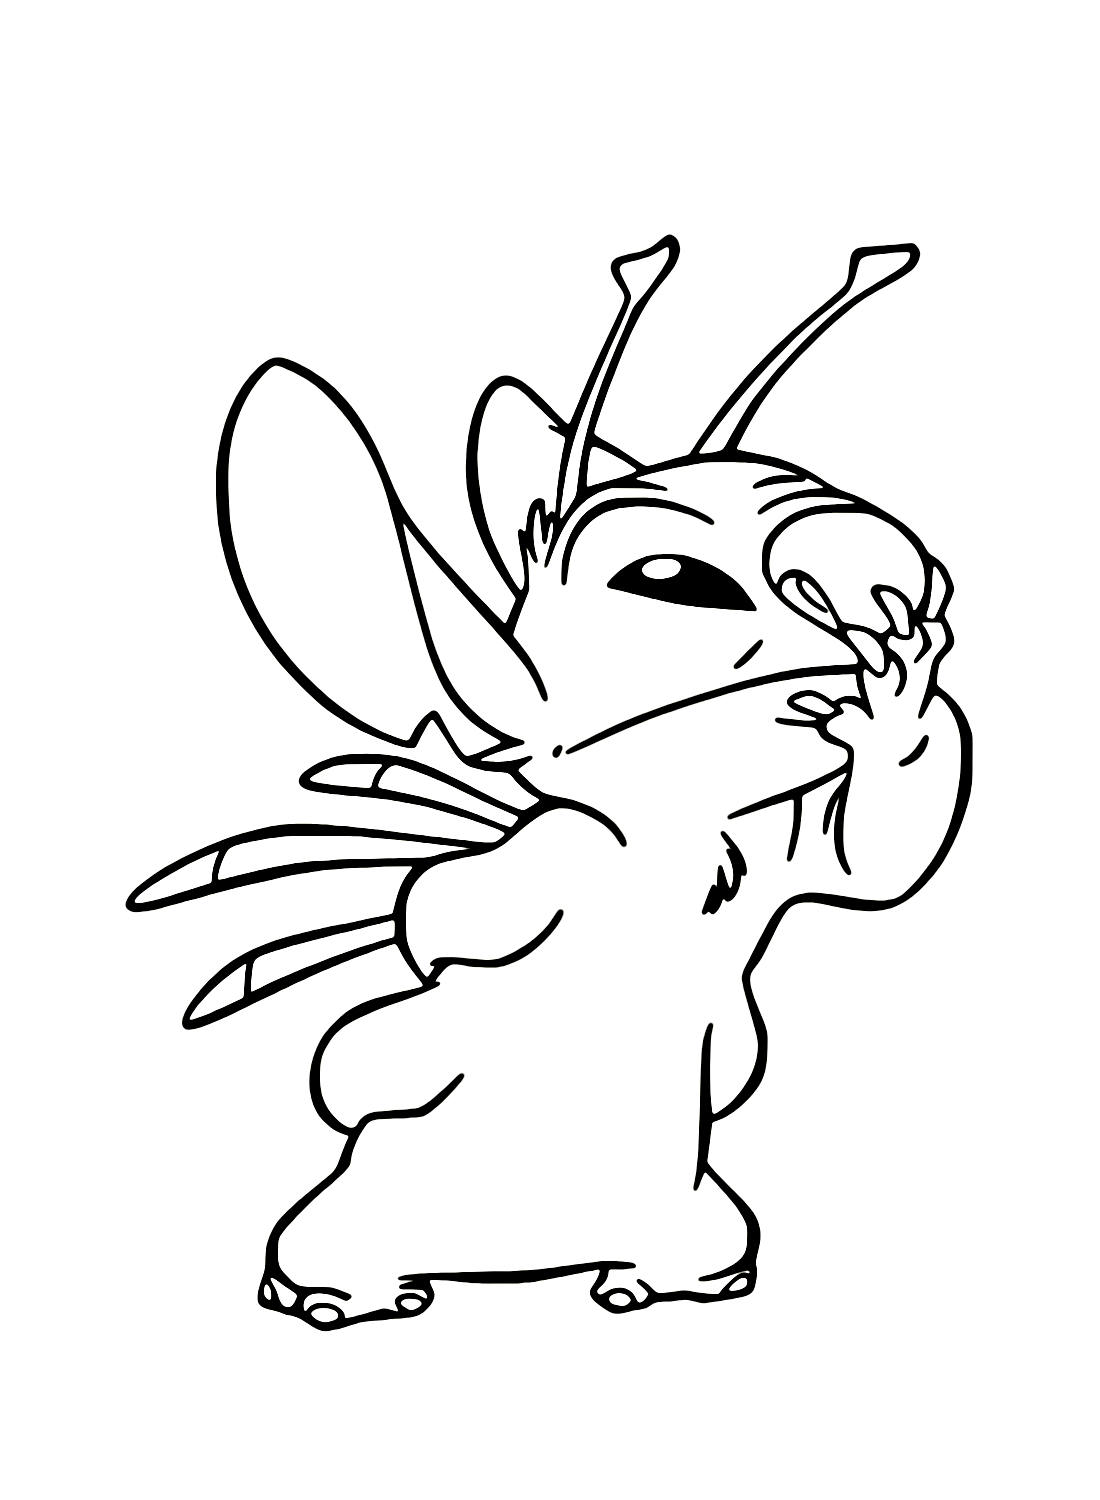 45 Stitch Coloring Pages - Coloringpagesonly.com